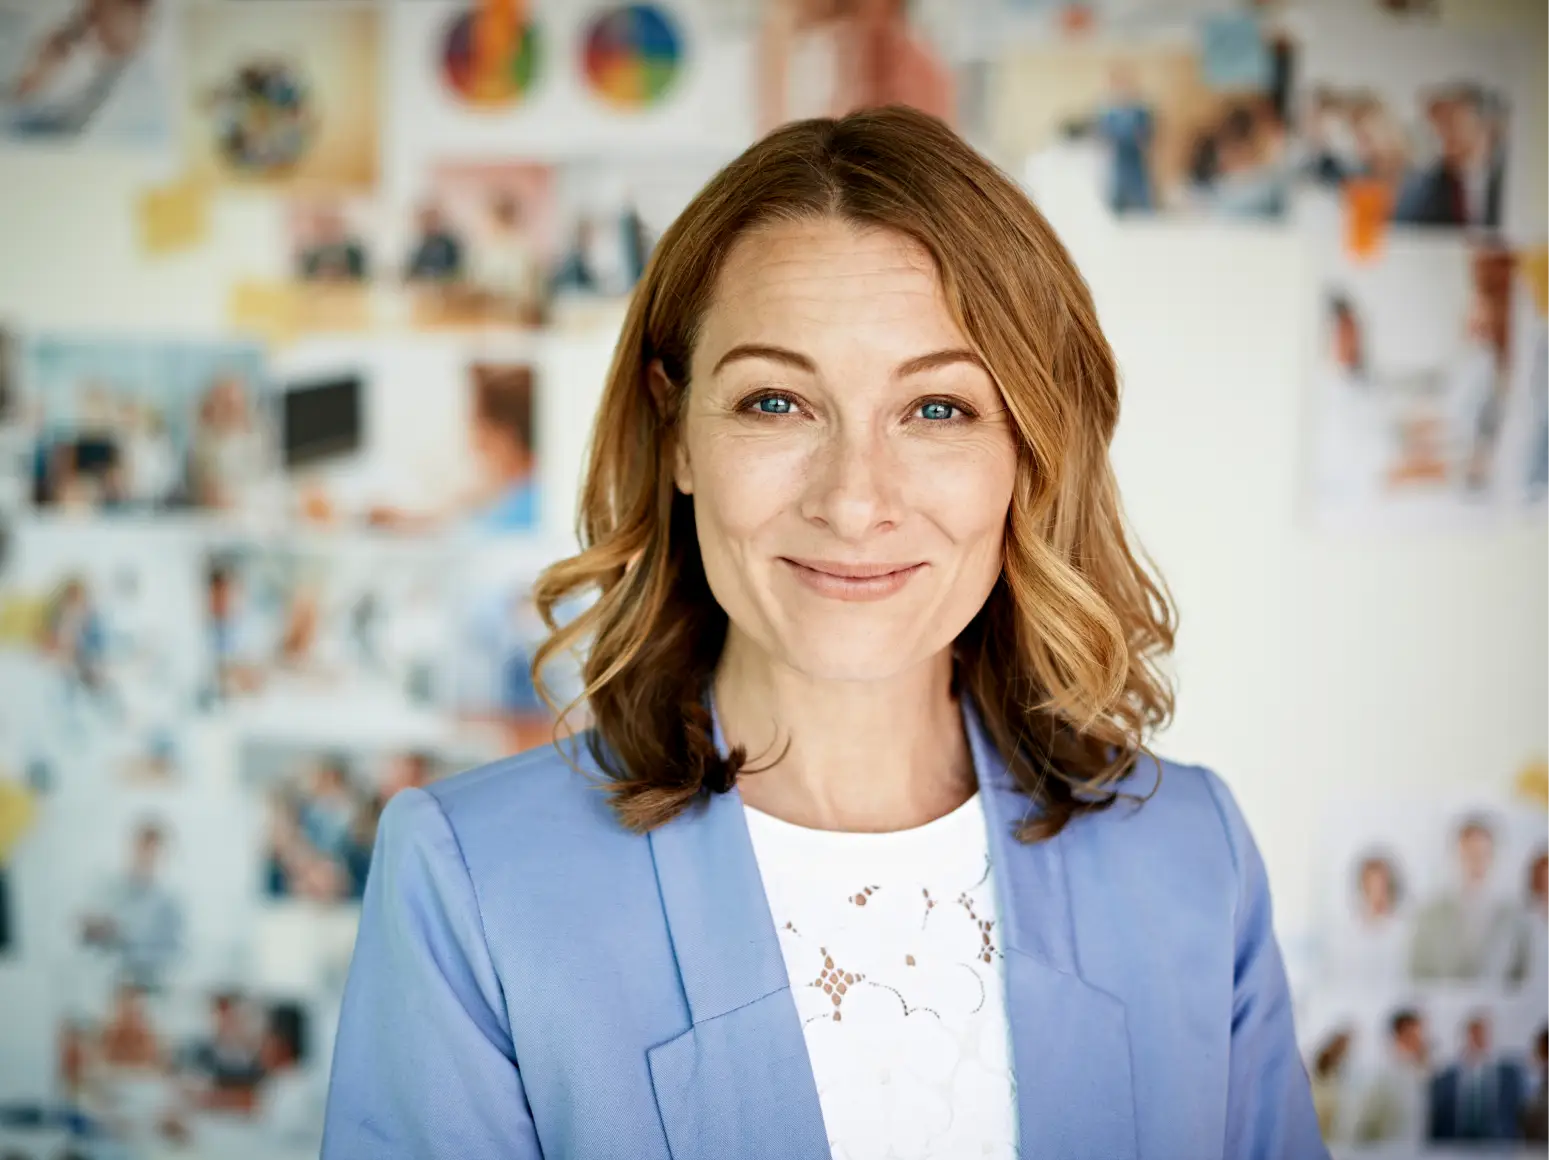 Woman in blue blazer smiling, printed photos on the wall in soft focus behind her